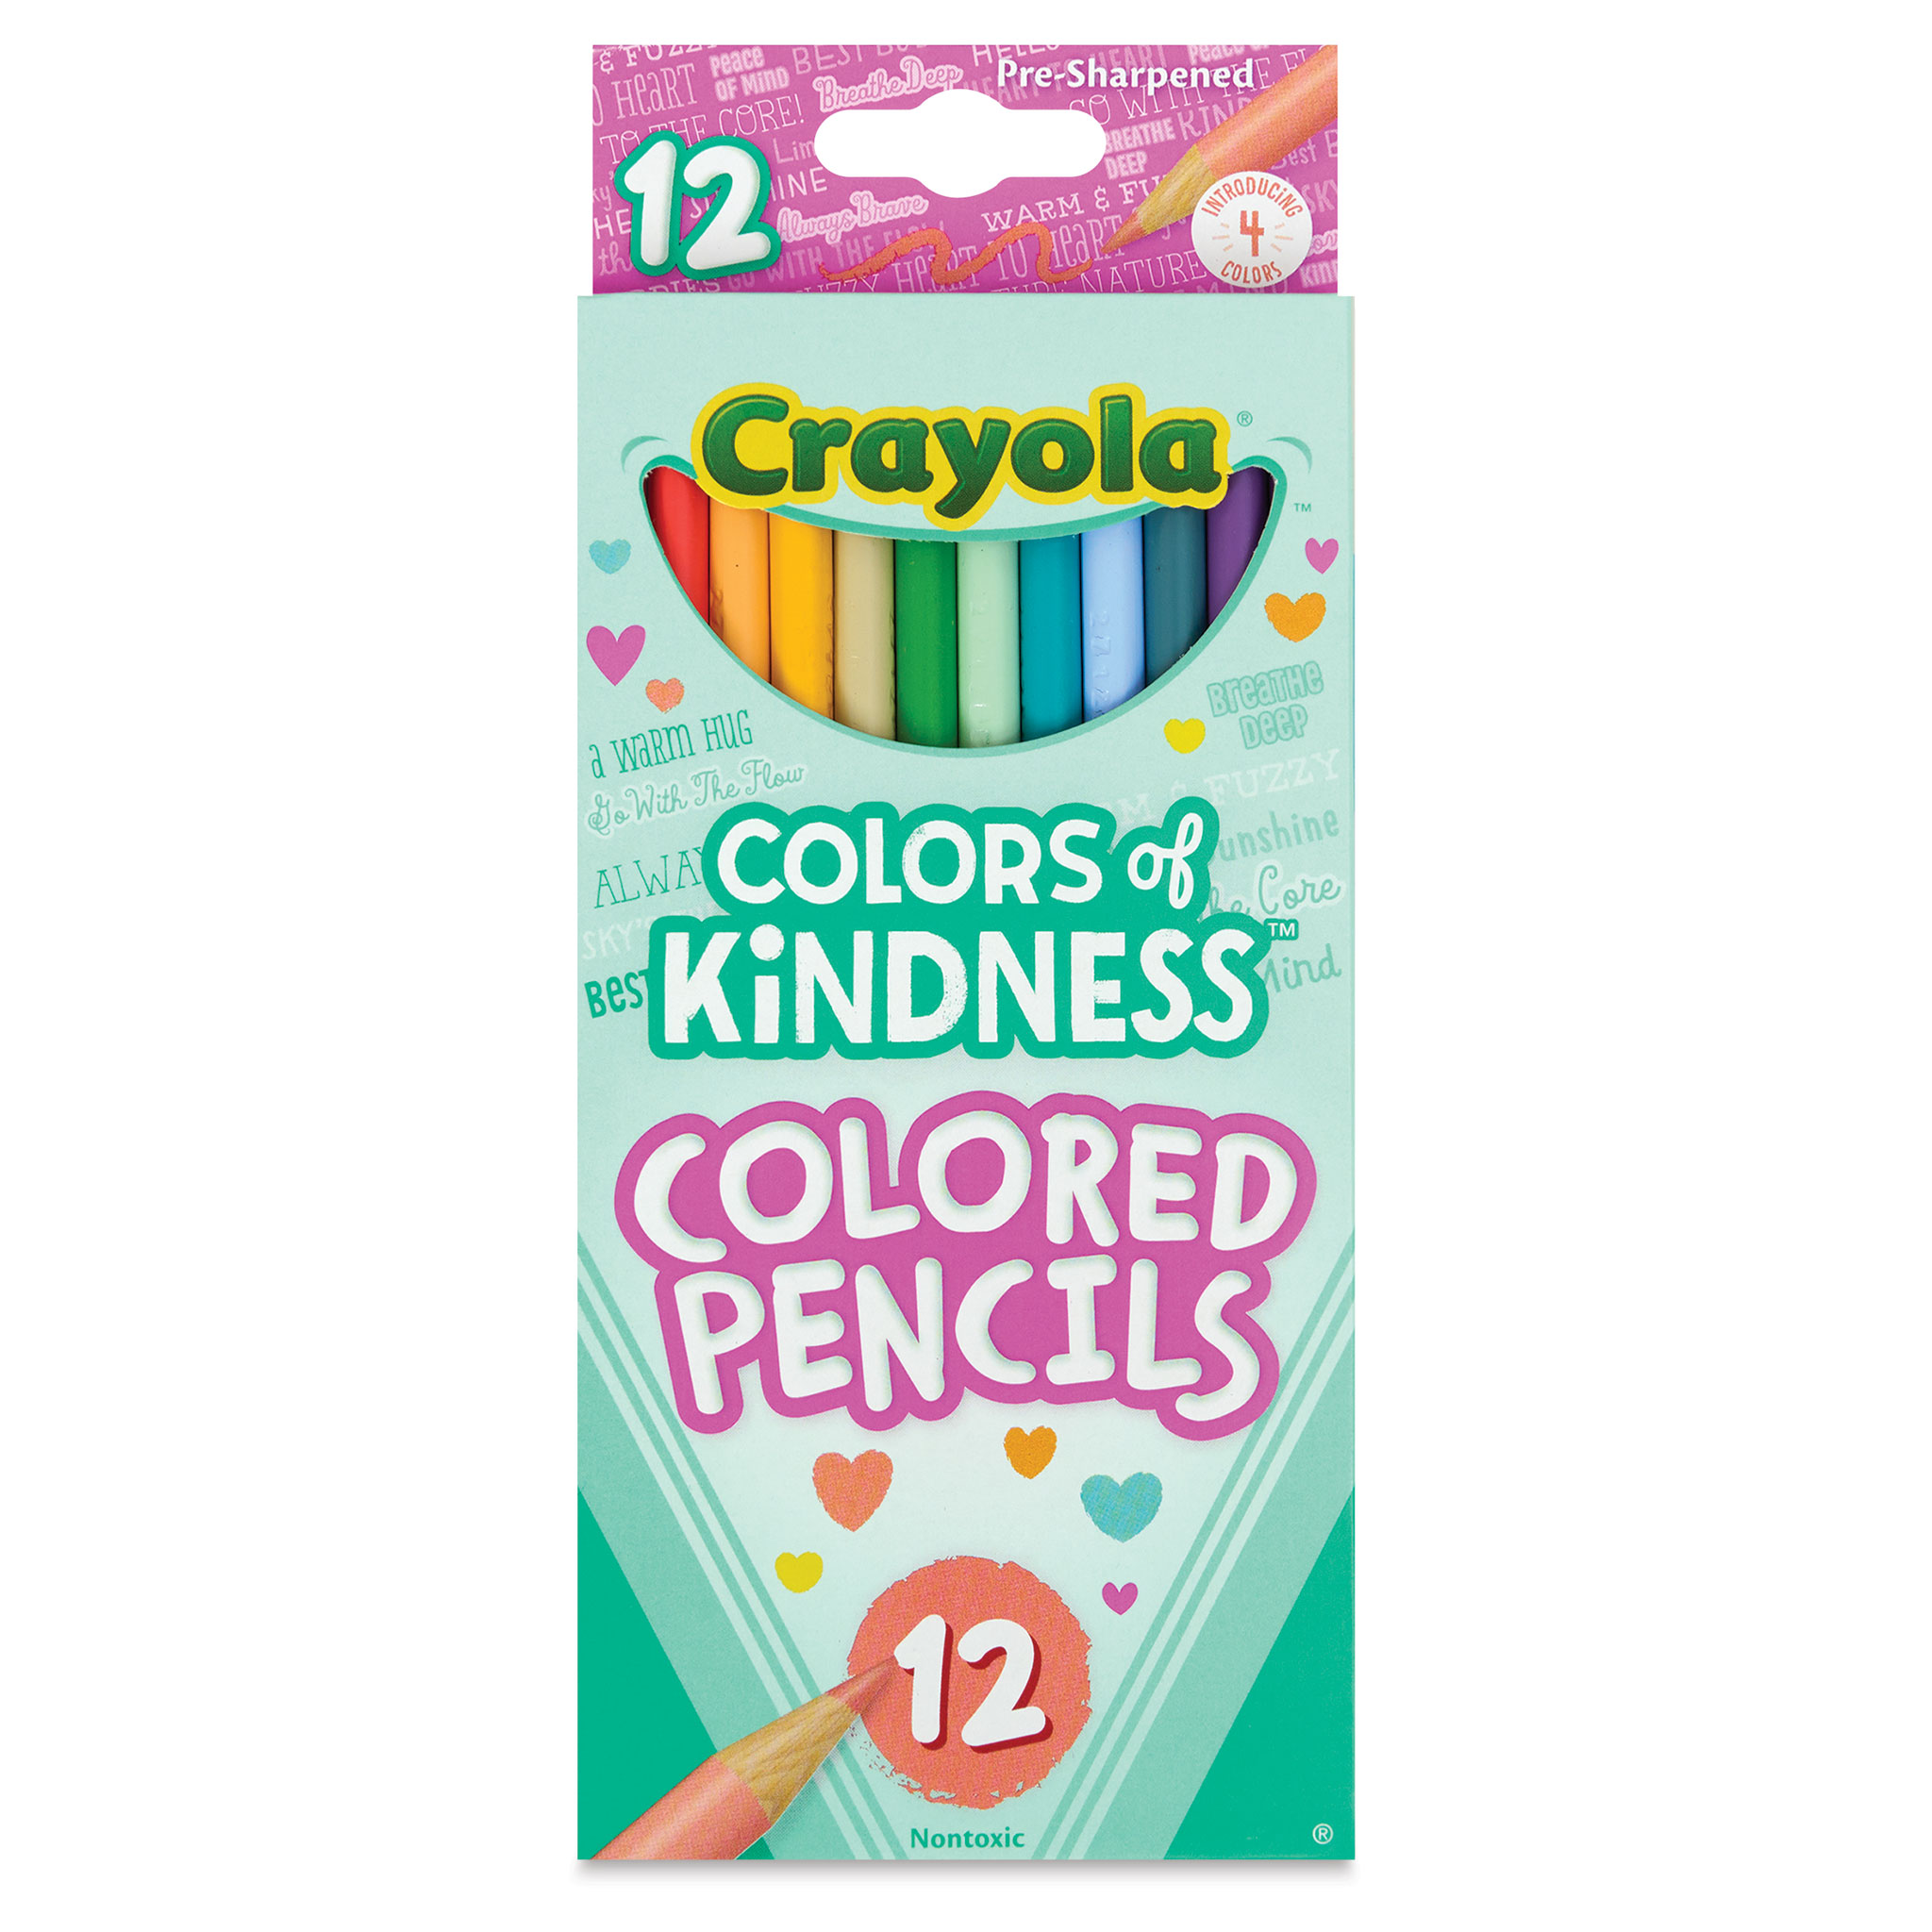 Yet More Crayola Colored Pencil Swatches (50 pack) 